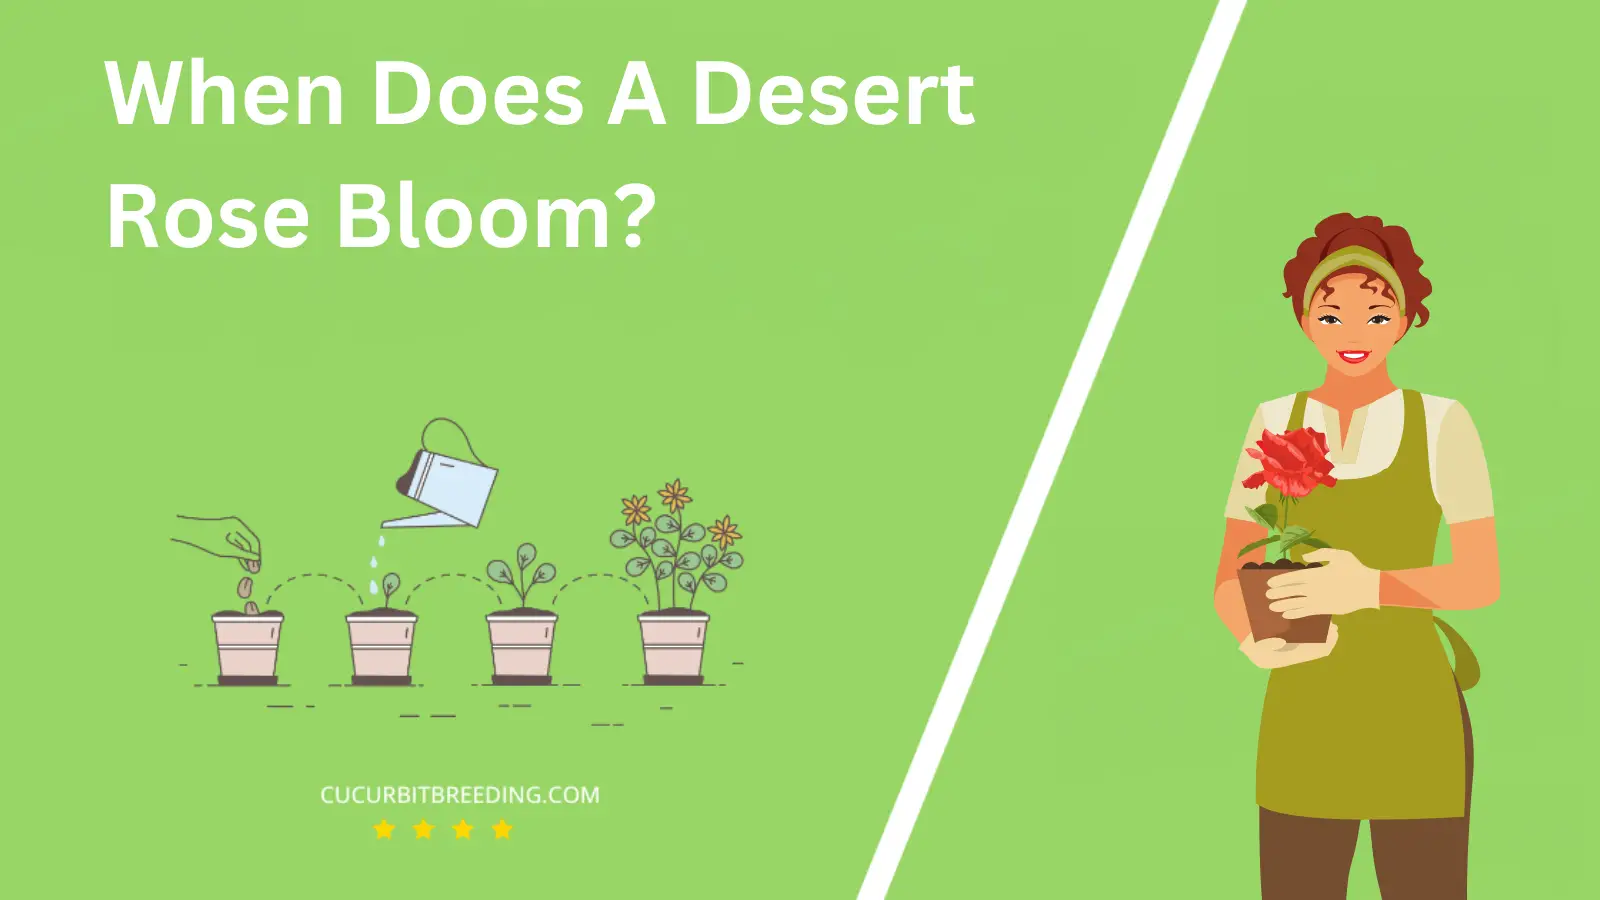 When Does A Desert Rose Bloom?